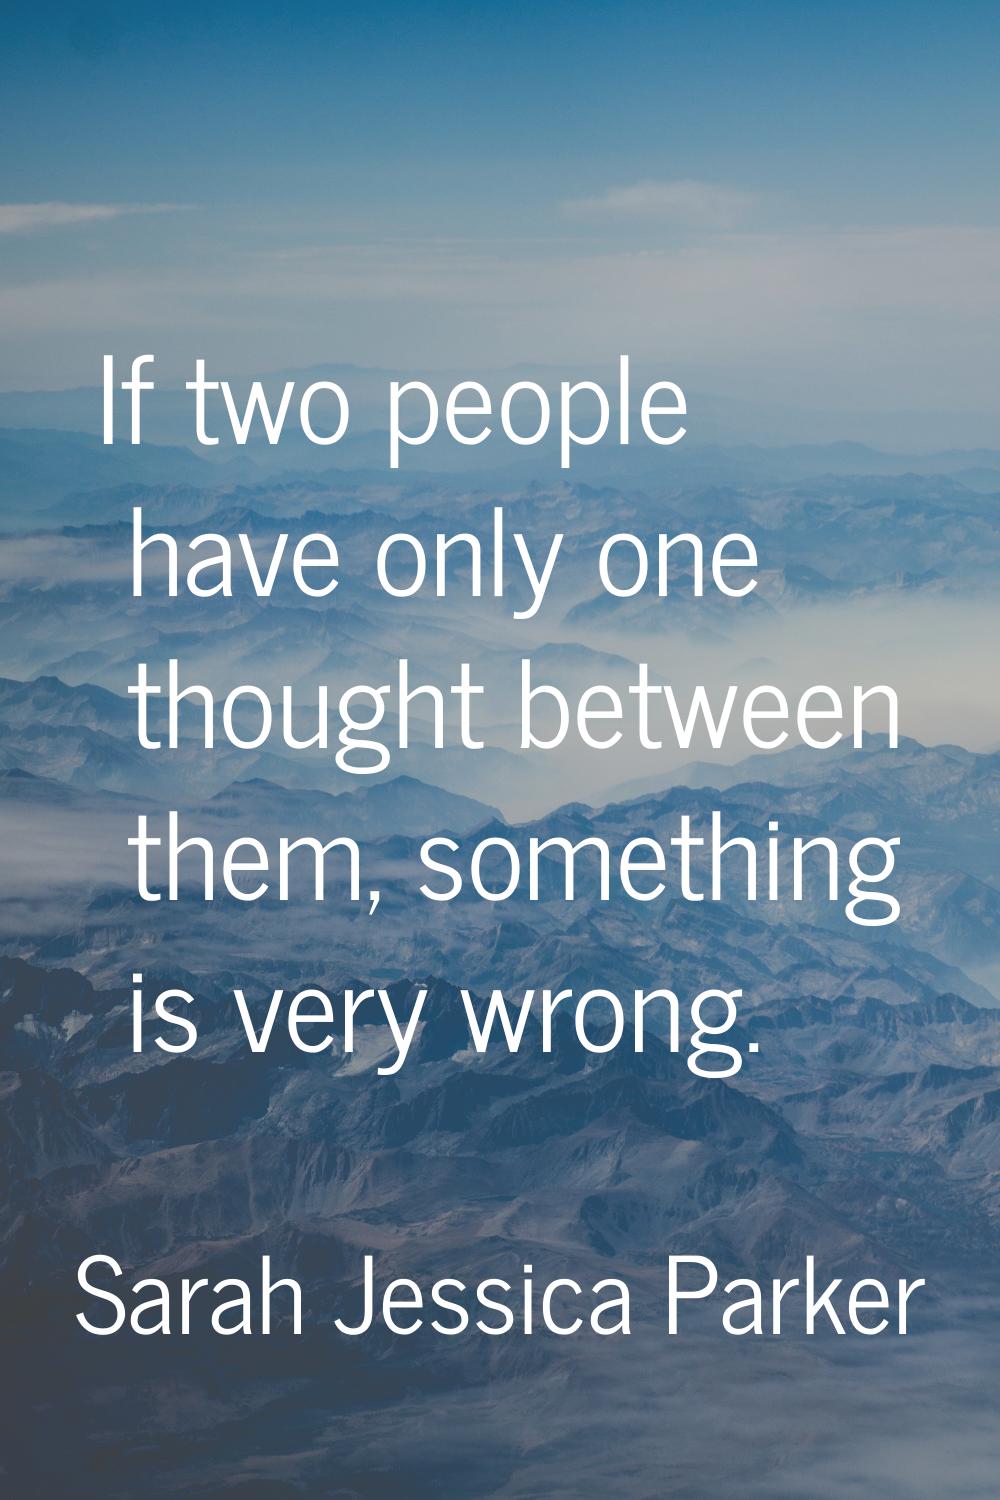 If two people have only one thought between them, something is very wrong.